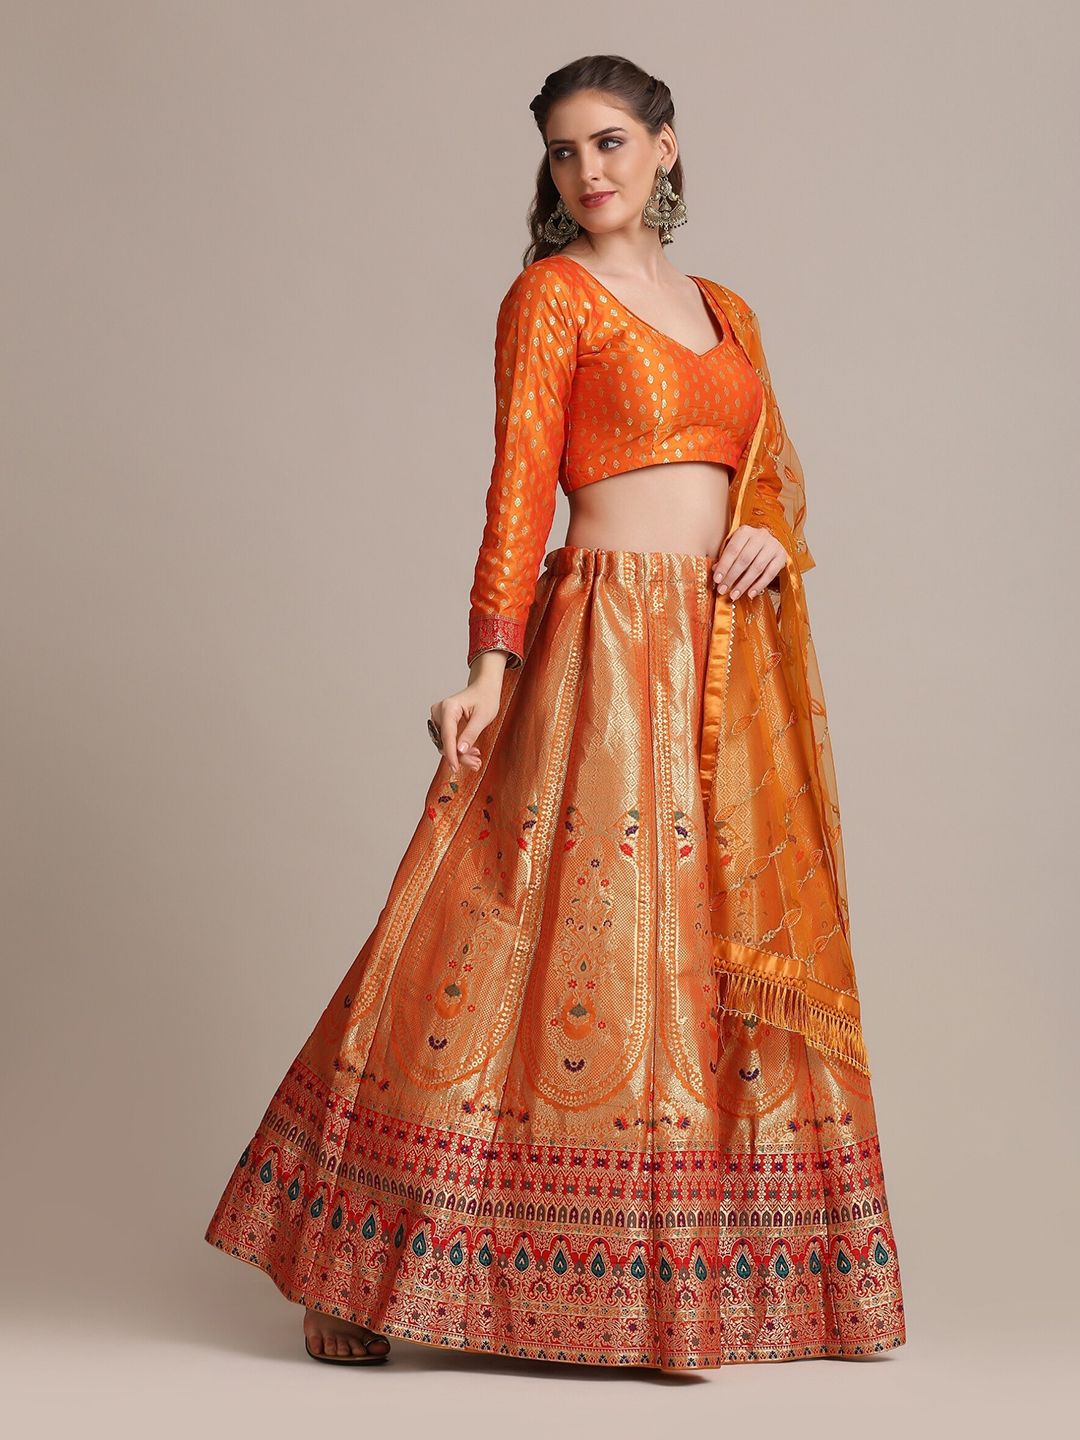 Warthy Ent Orange & Gold-Toned Semi-Stitched Lehenga & Unstitched Blouse With Dupatta Price in India